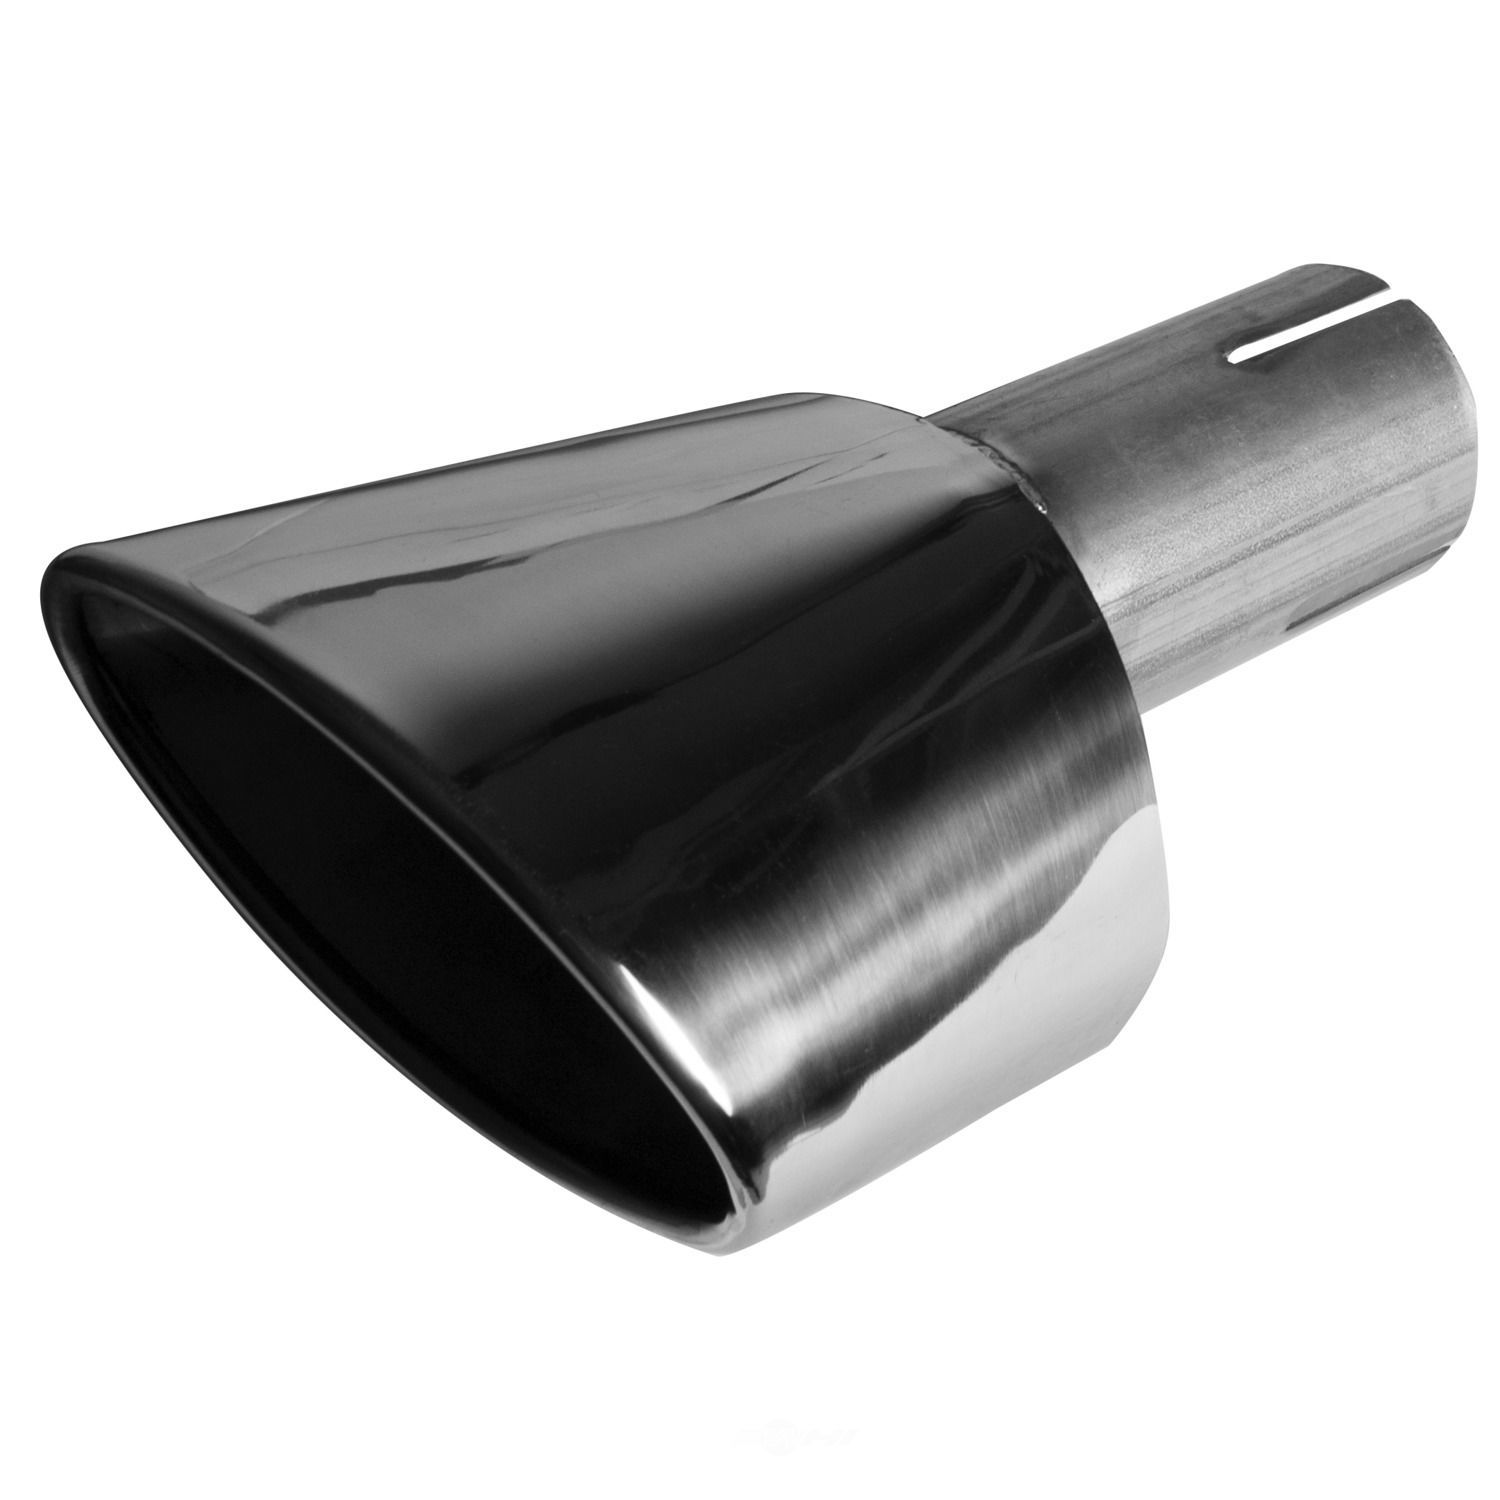 AP EXHAUST W/FEDERAL CONVERTER - Exhaust Tail Pipe Tip - APF ST1264S